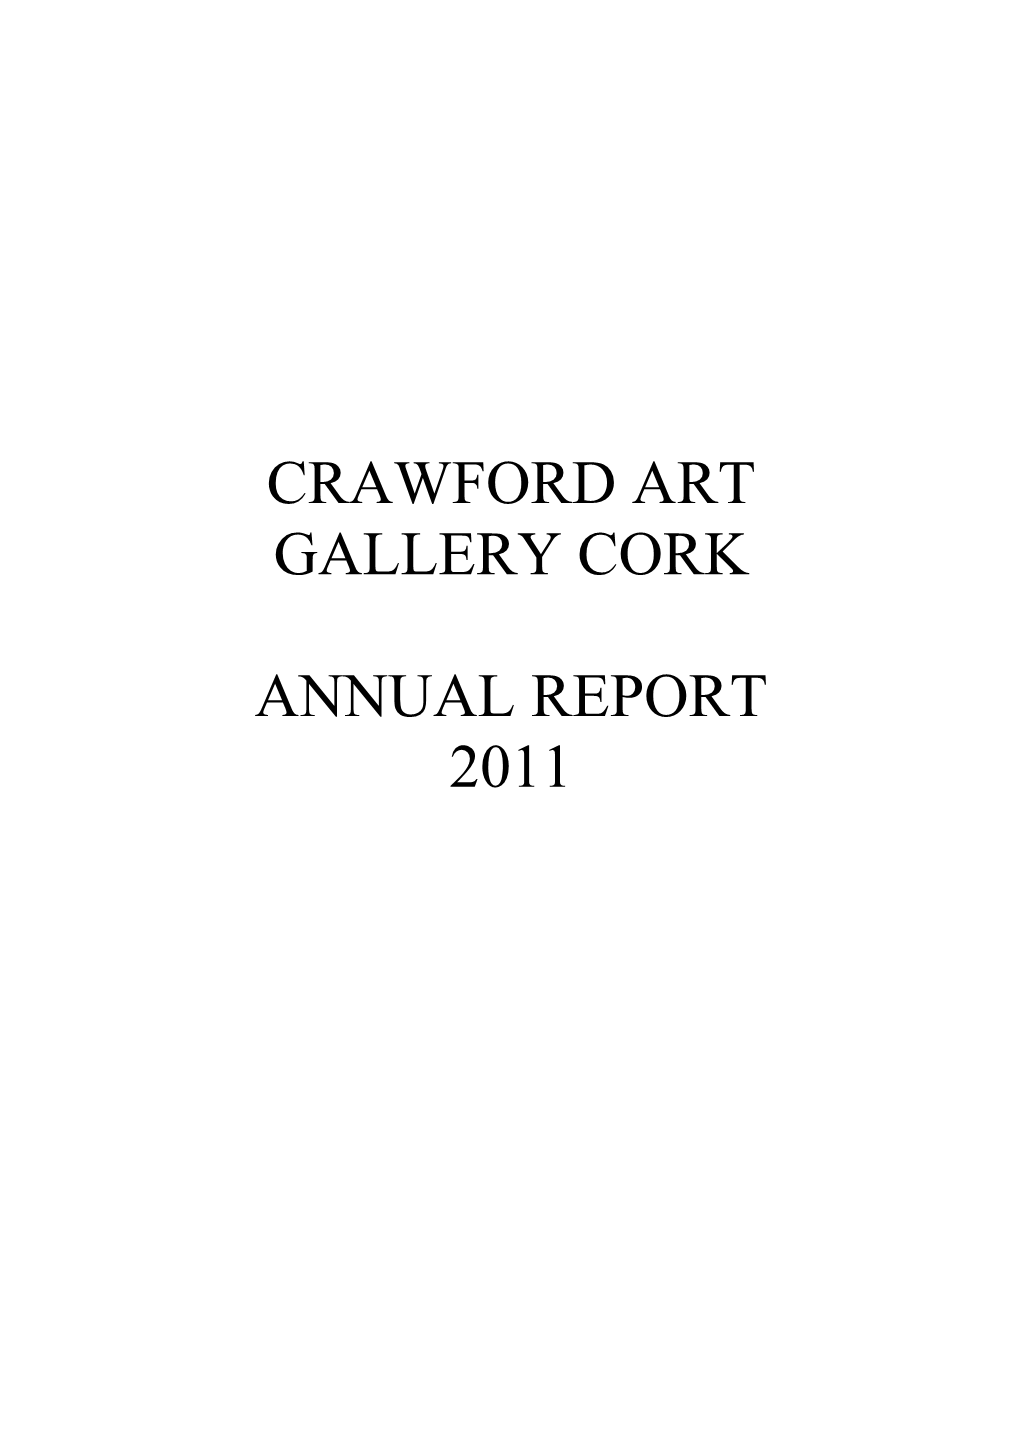 Final Gallery Annual Report 2011 30 July 2012